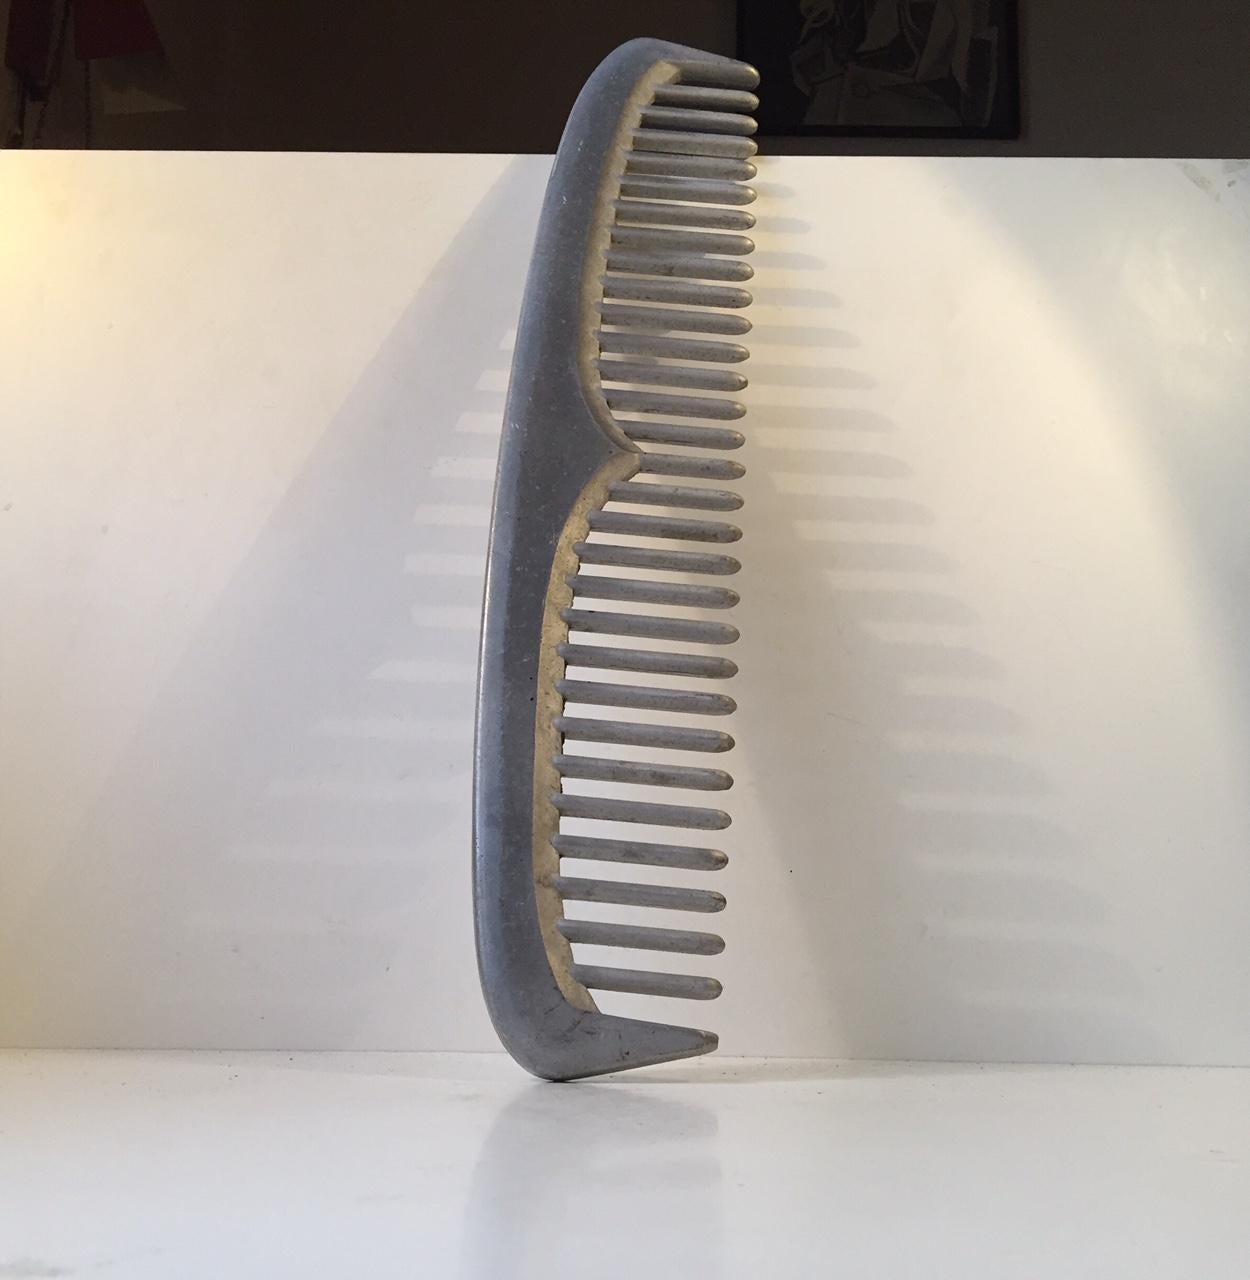 A large unique comb that hang outside a Barbershop in Esbjerg, Denmark. From circa 1950-1980. It is made from solid aluminium and is a rather precise and detailed imitation of the vintage aluminium comb for beard and hair.